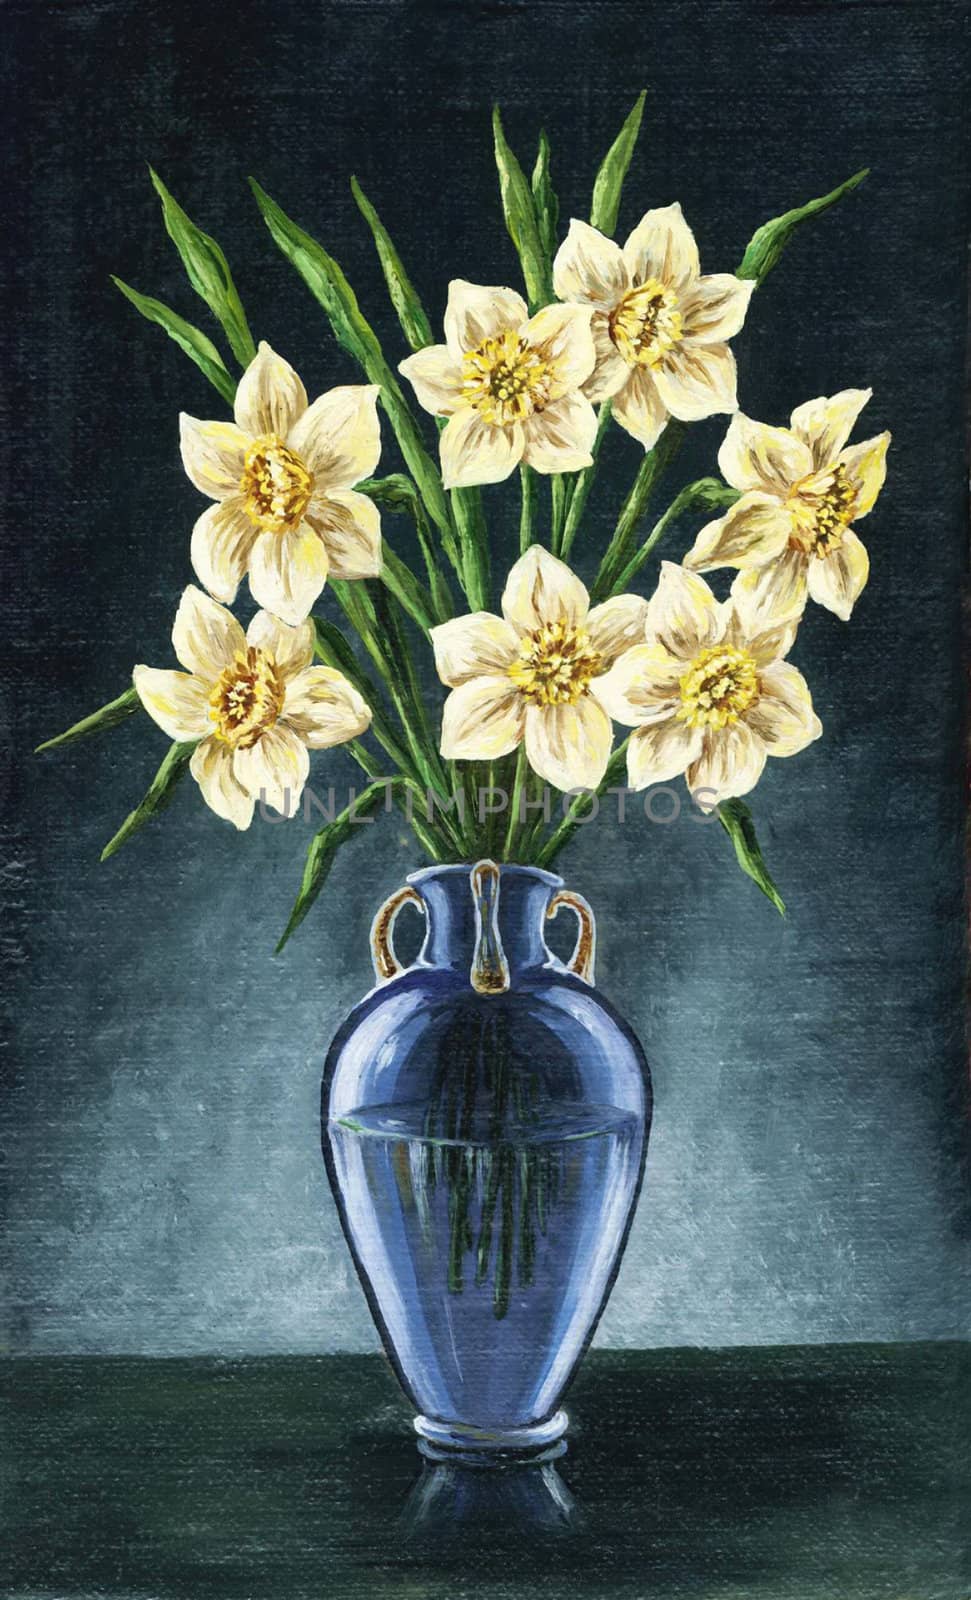 Narcissuses in a blue vase by alexcoolok